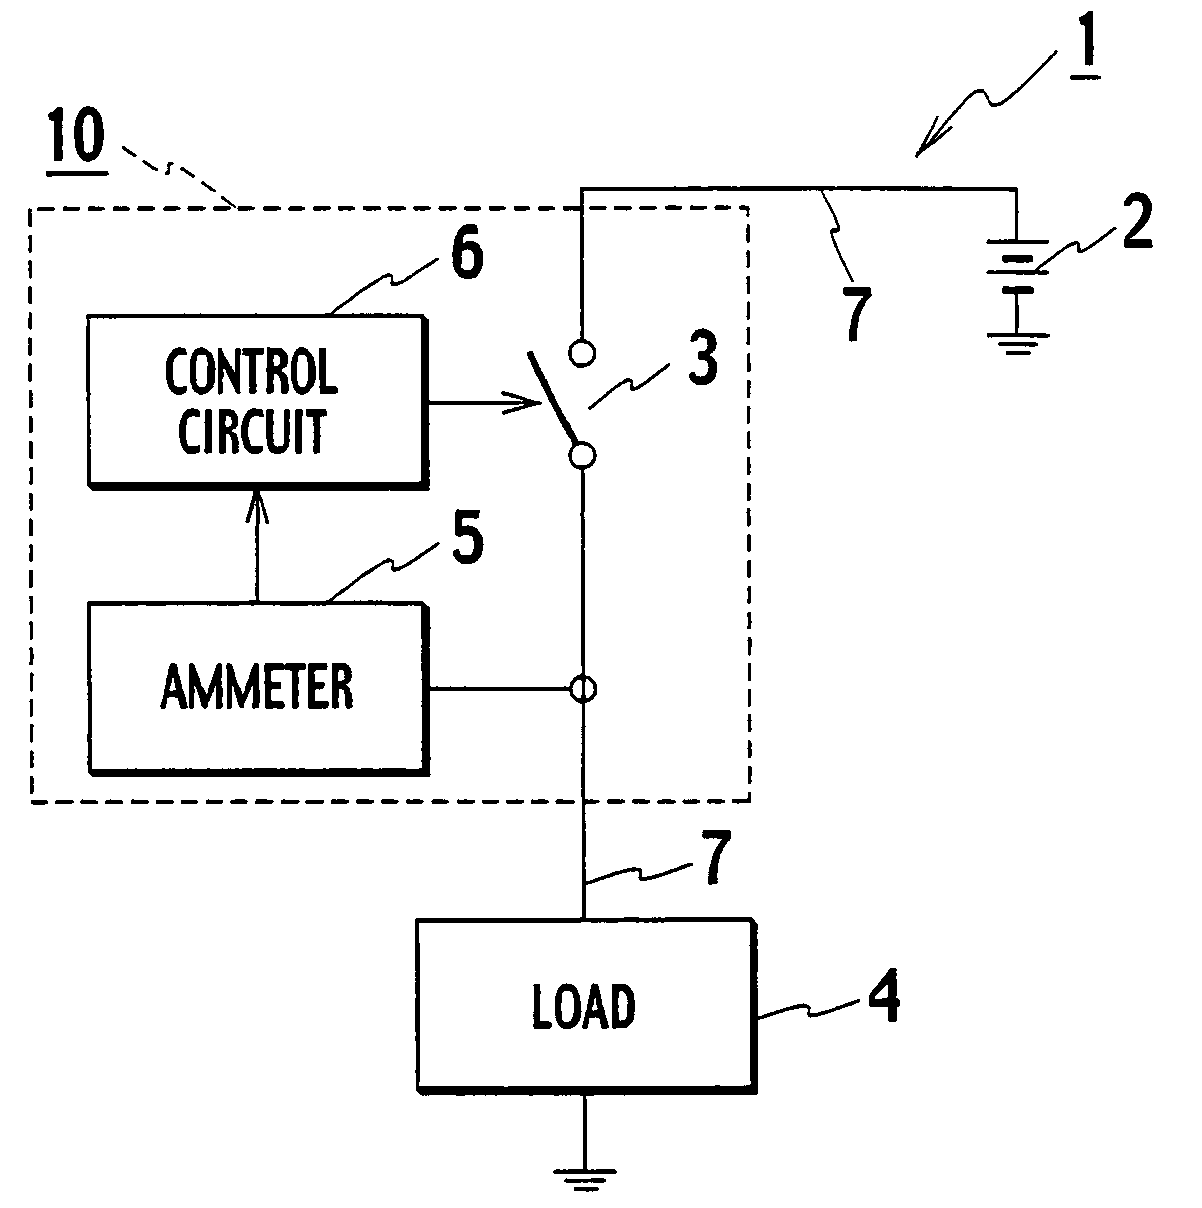 Protection device for load circuits